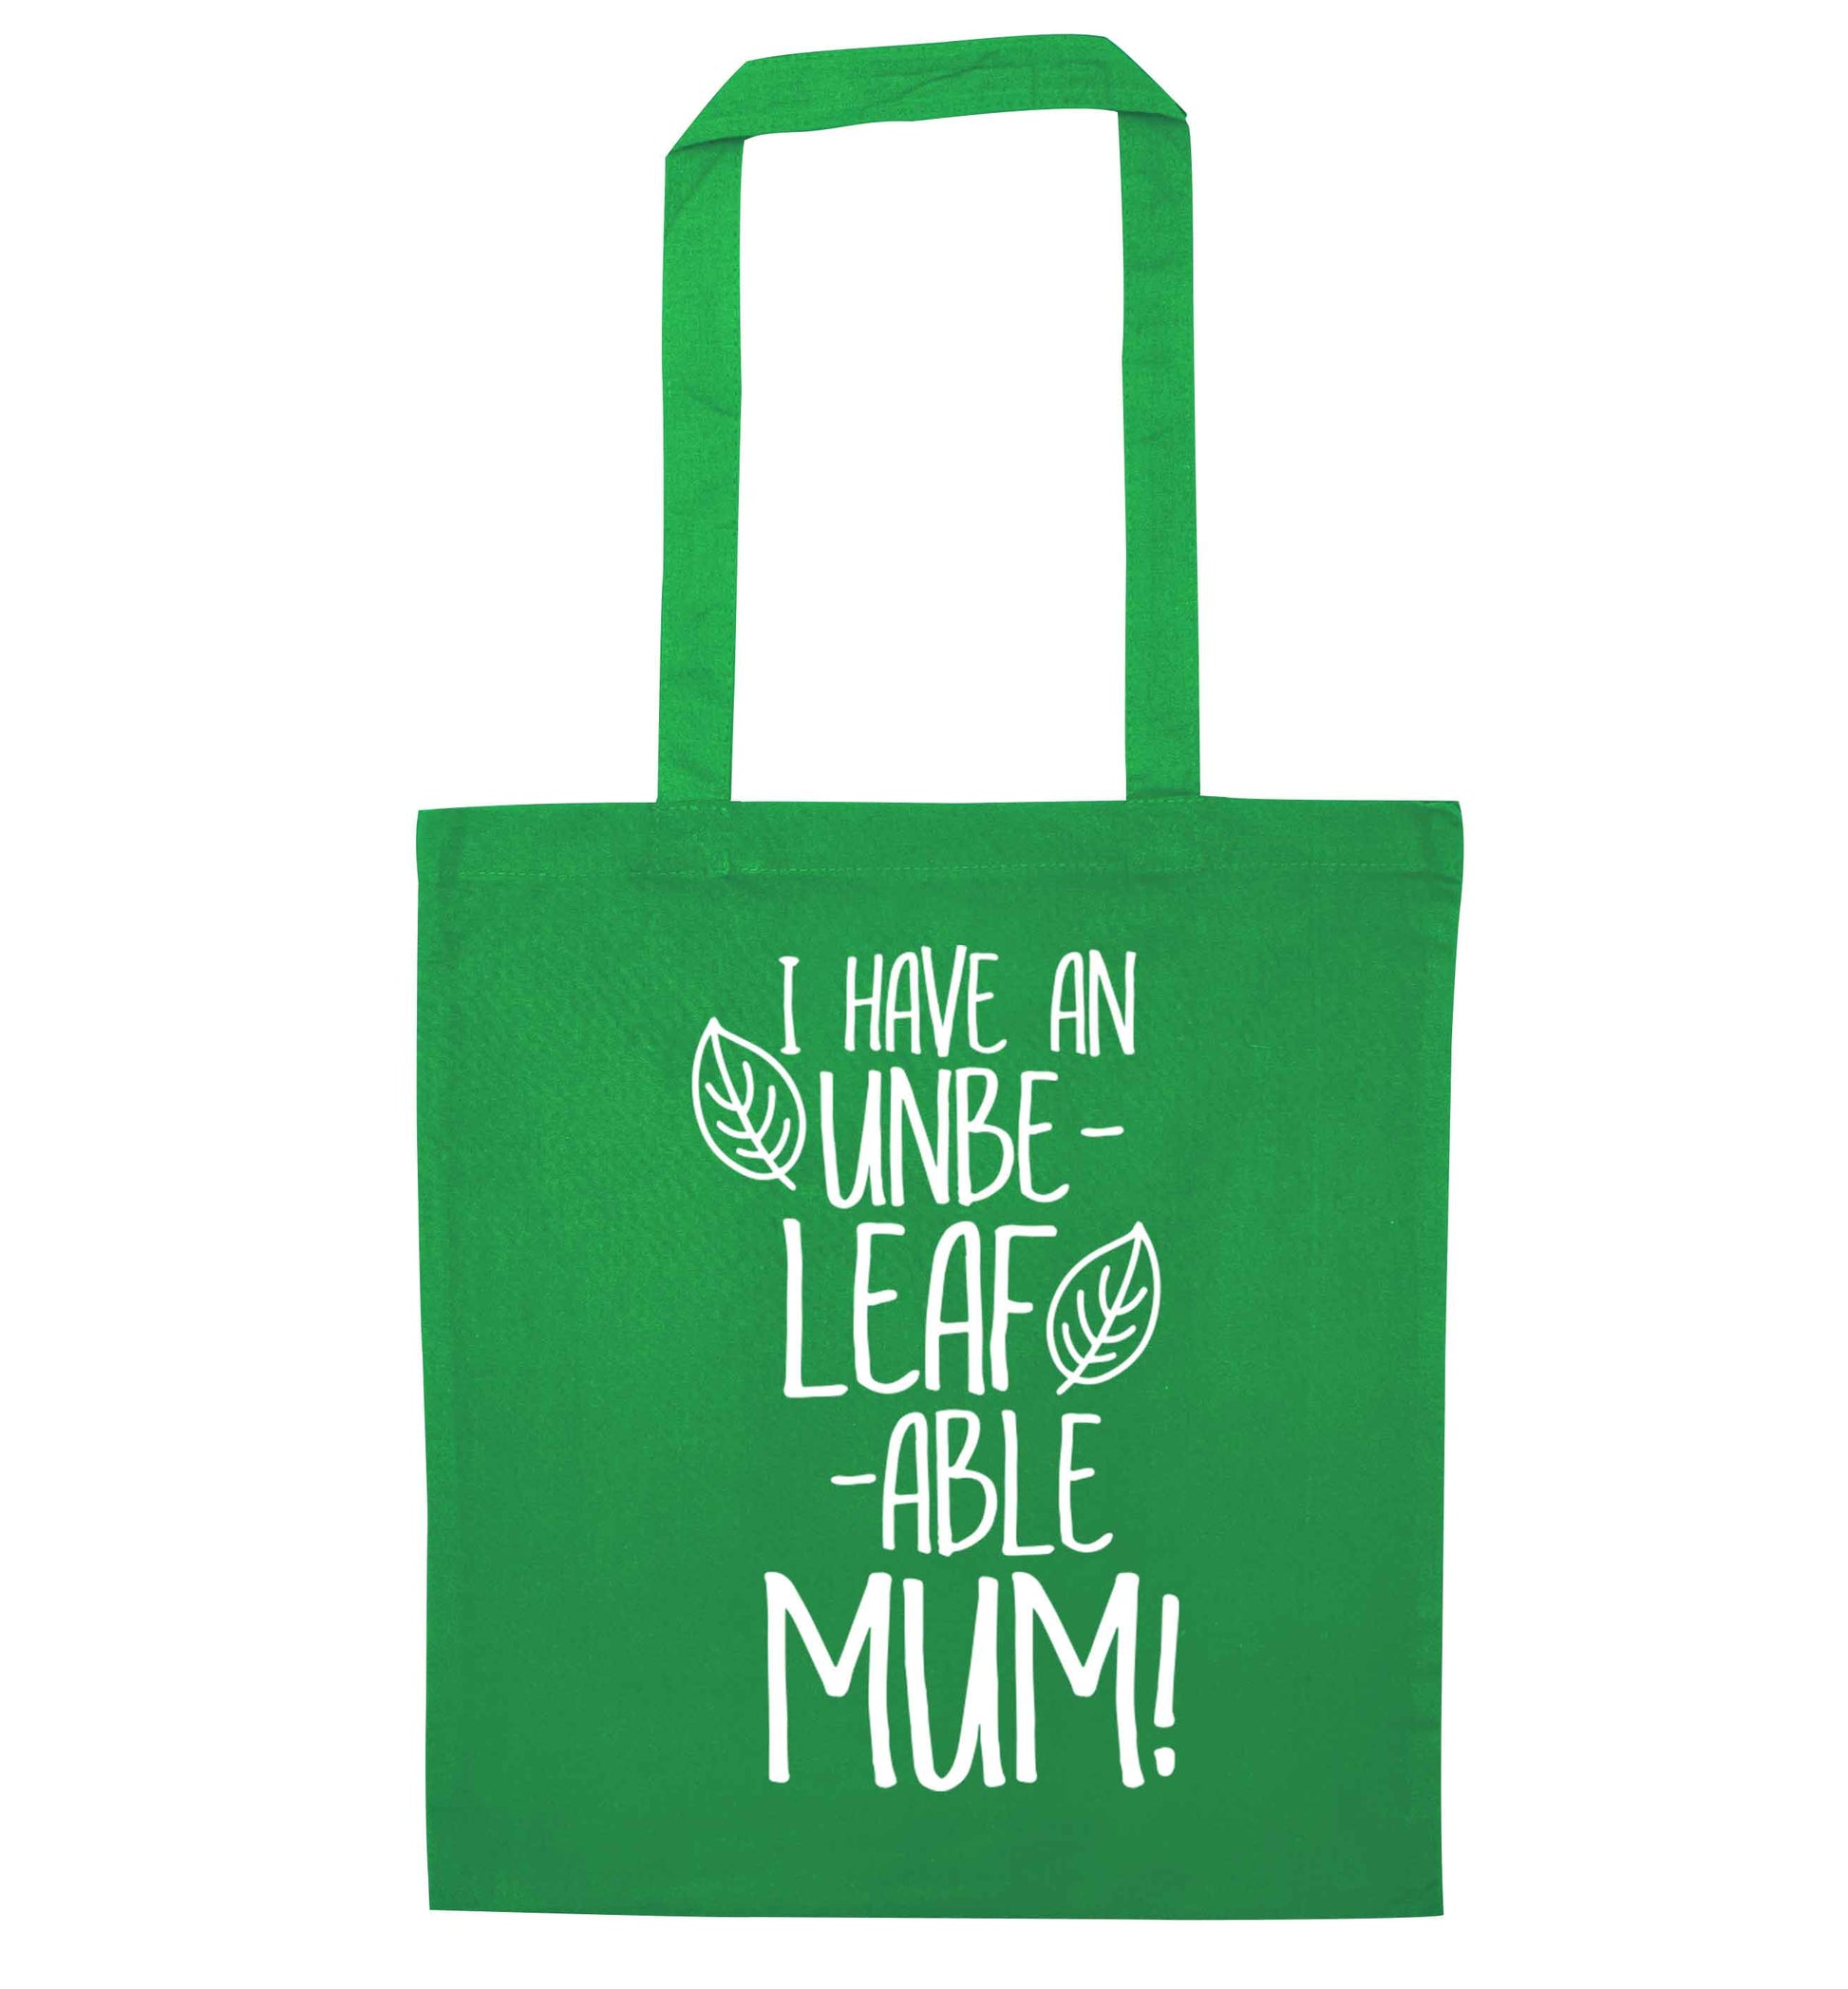 I have an unbeleafable mum! green tote bag